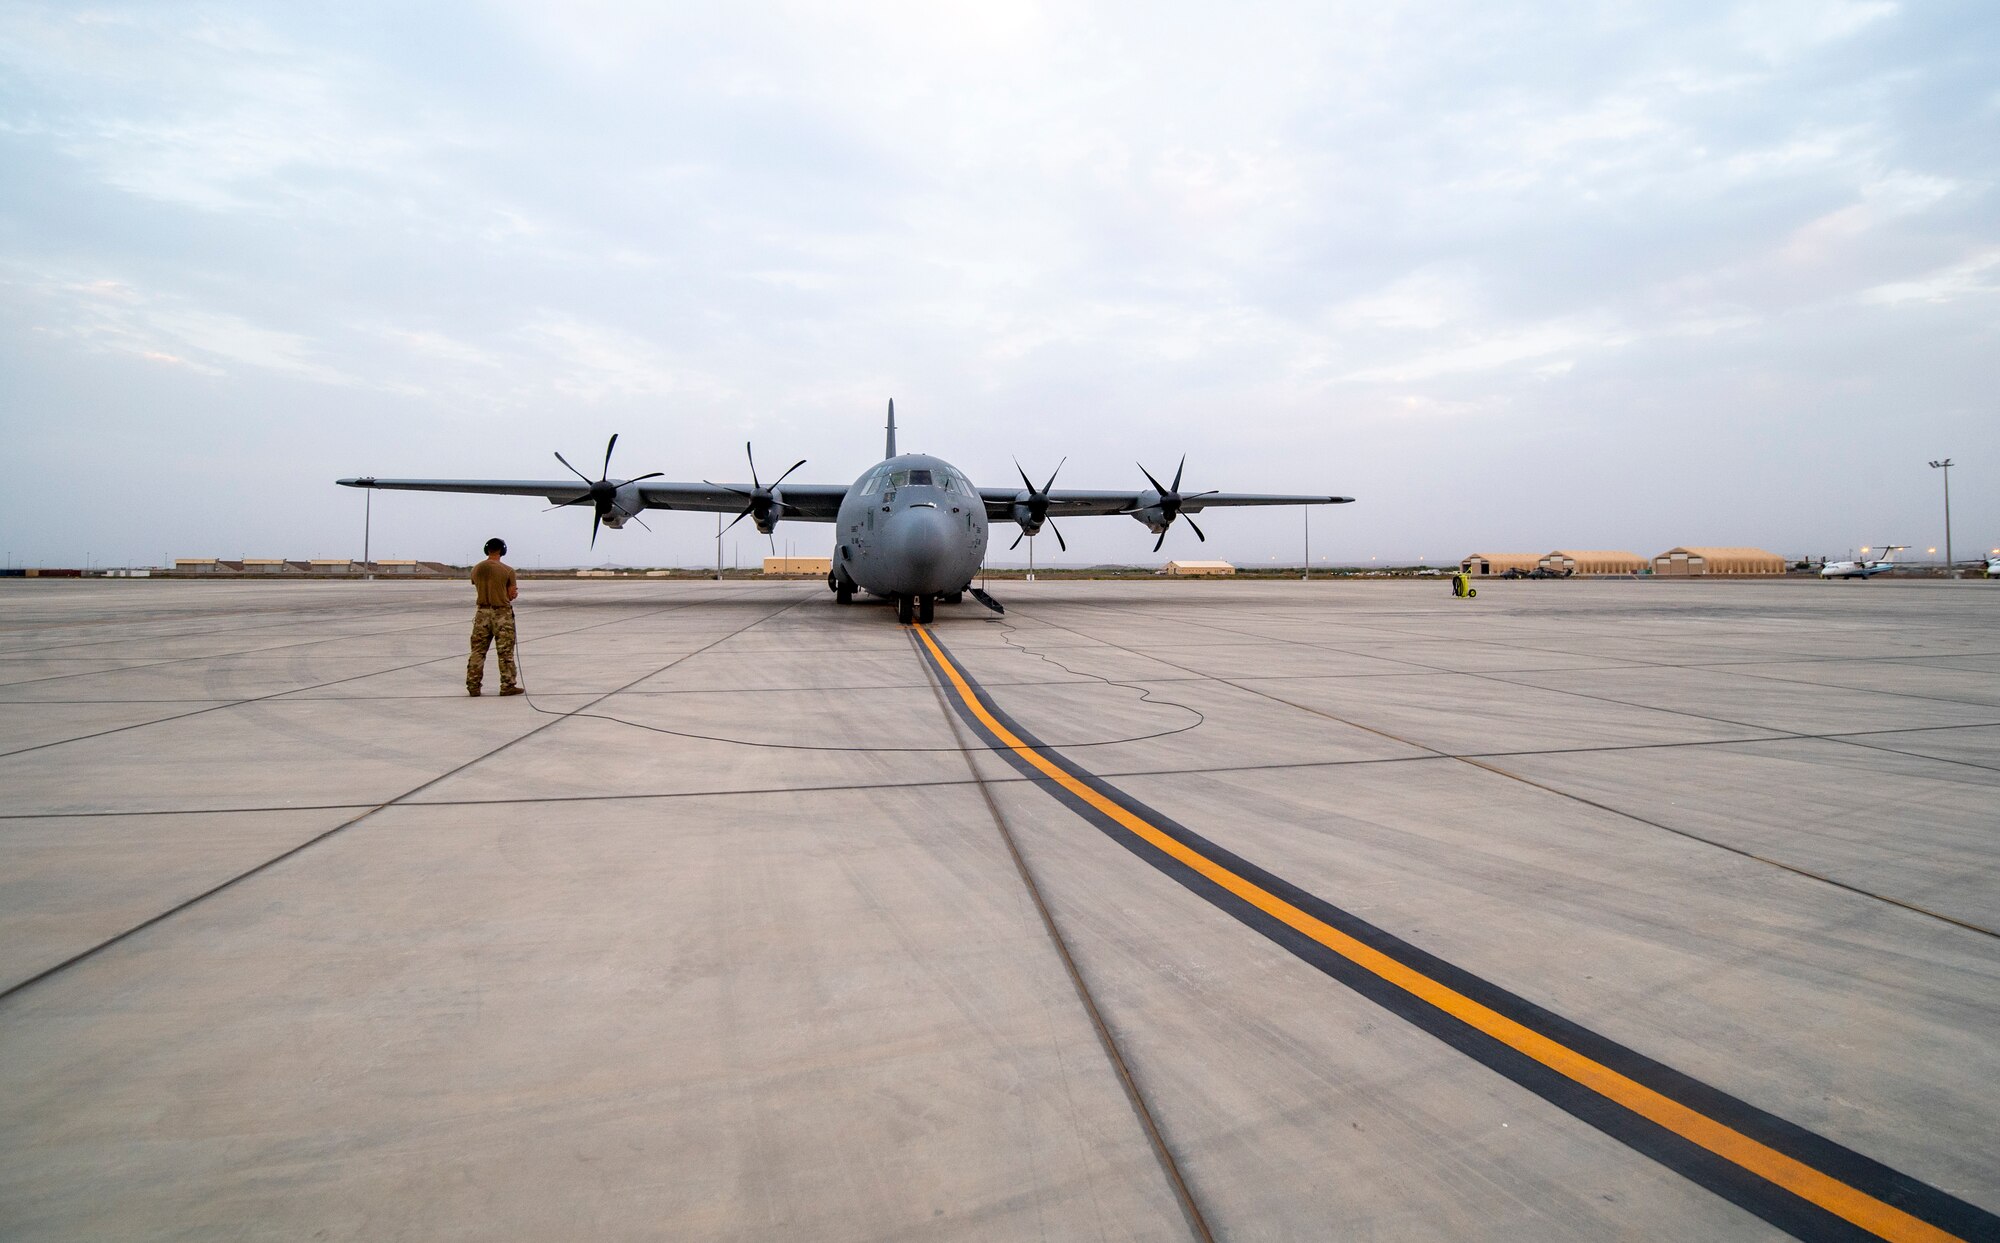 A U.S. Air Force 75th Expeditionary Airlift Squadron (EAS) loadmaster ensures engine start of a C-130J Super Hercules at Camp Lemonnier, Djibouti, June 28, 2020. The 75th EAS provides strategic airlift capabilities across the Combined Joint Task Force - Horn of Africa (CJTF-HOA) area of responsibility. (U.S. Air Force photo by Tech. Sgt. Christopher Ruano)